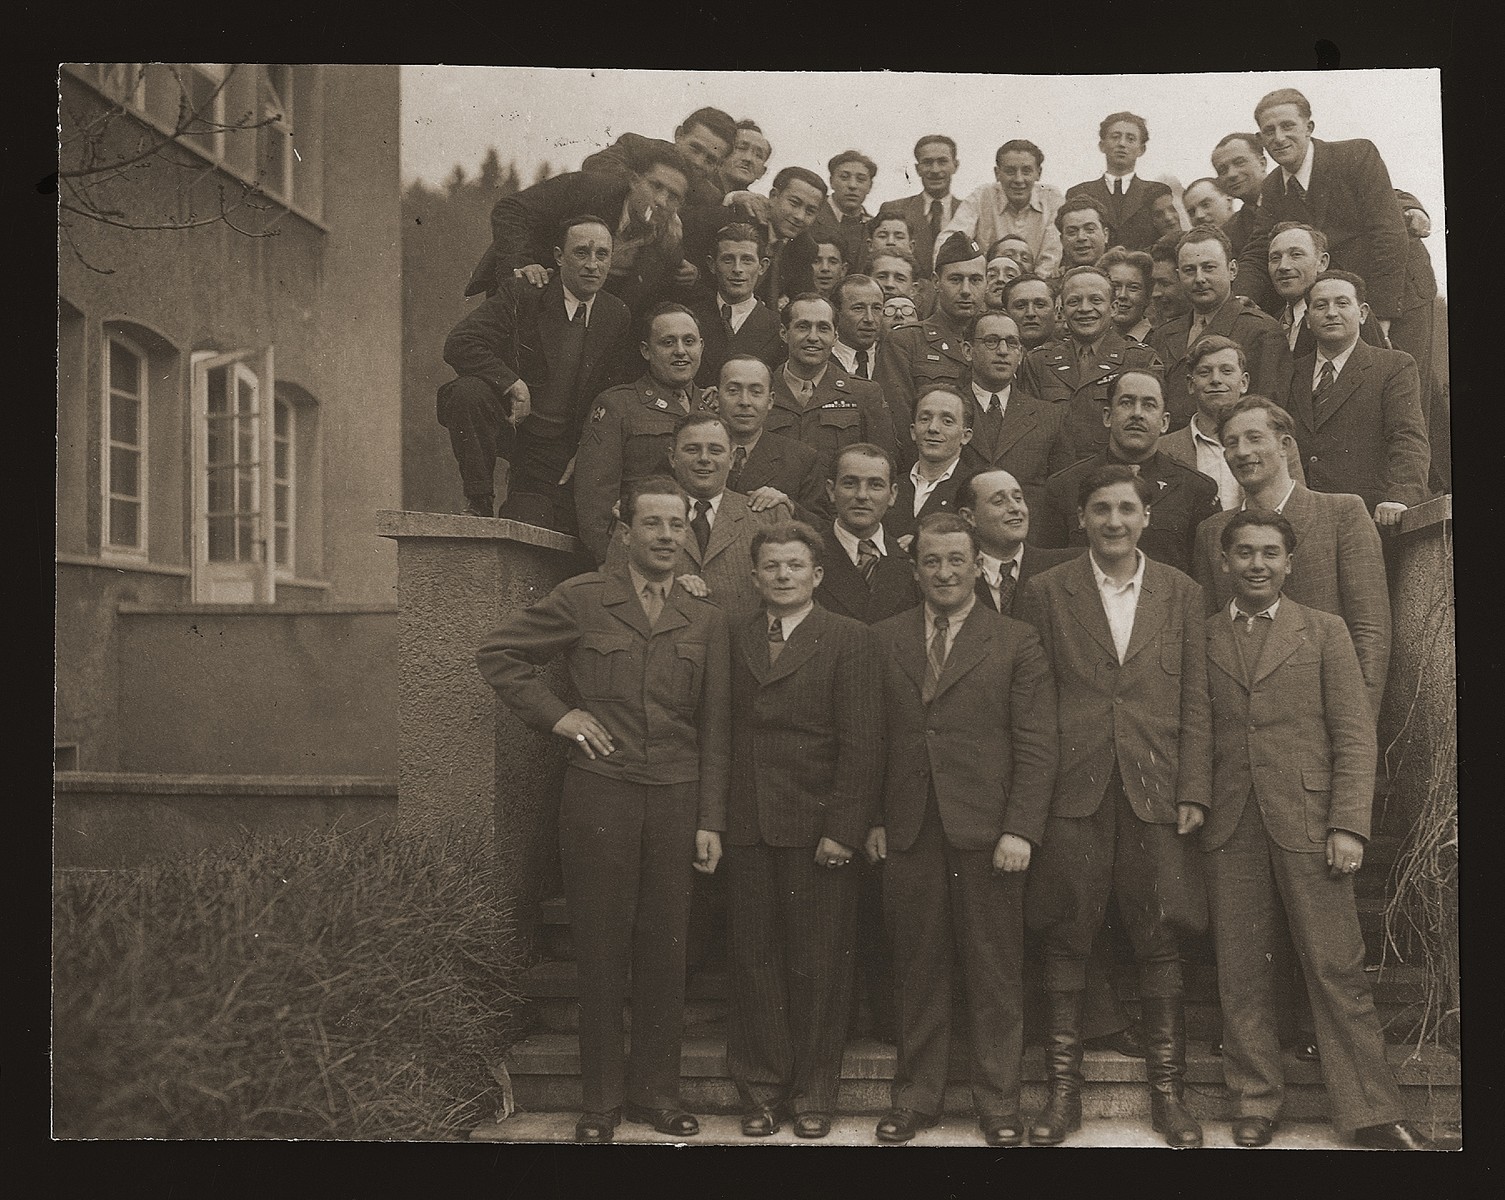 Group portrait of Jewish DPs and American soldiers at the Heidenheim displaced persons camp. 

Leon Kliot (Klott) is standing on the far right, third from the top.  Pictured in the second row from the bottom, on the far left, is Solomon Voicuk from WIlnow, Lithuania